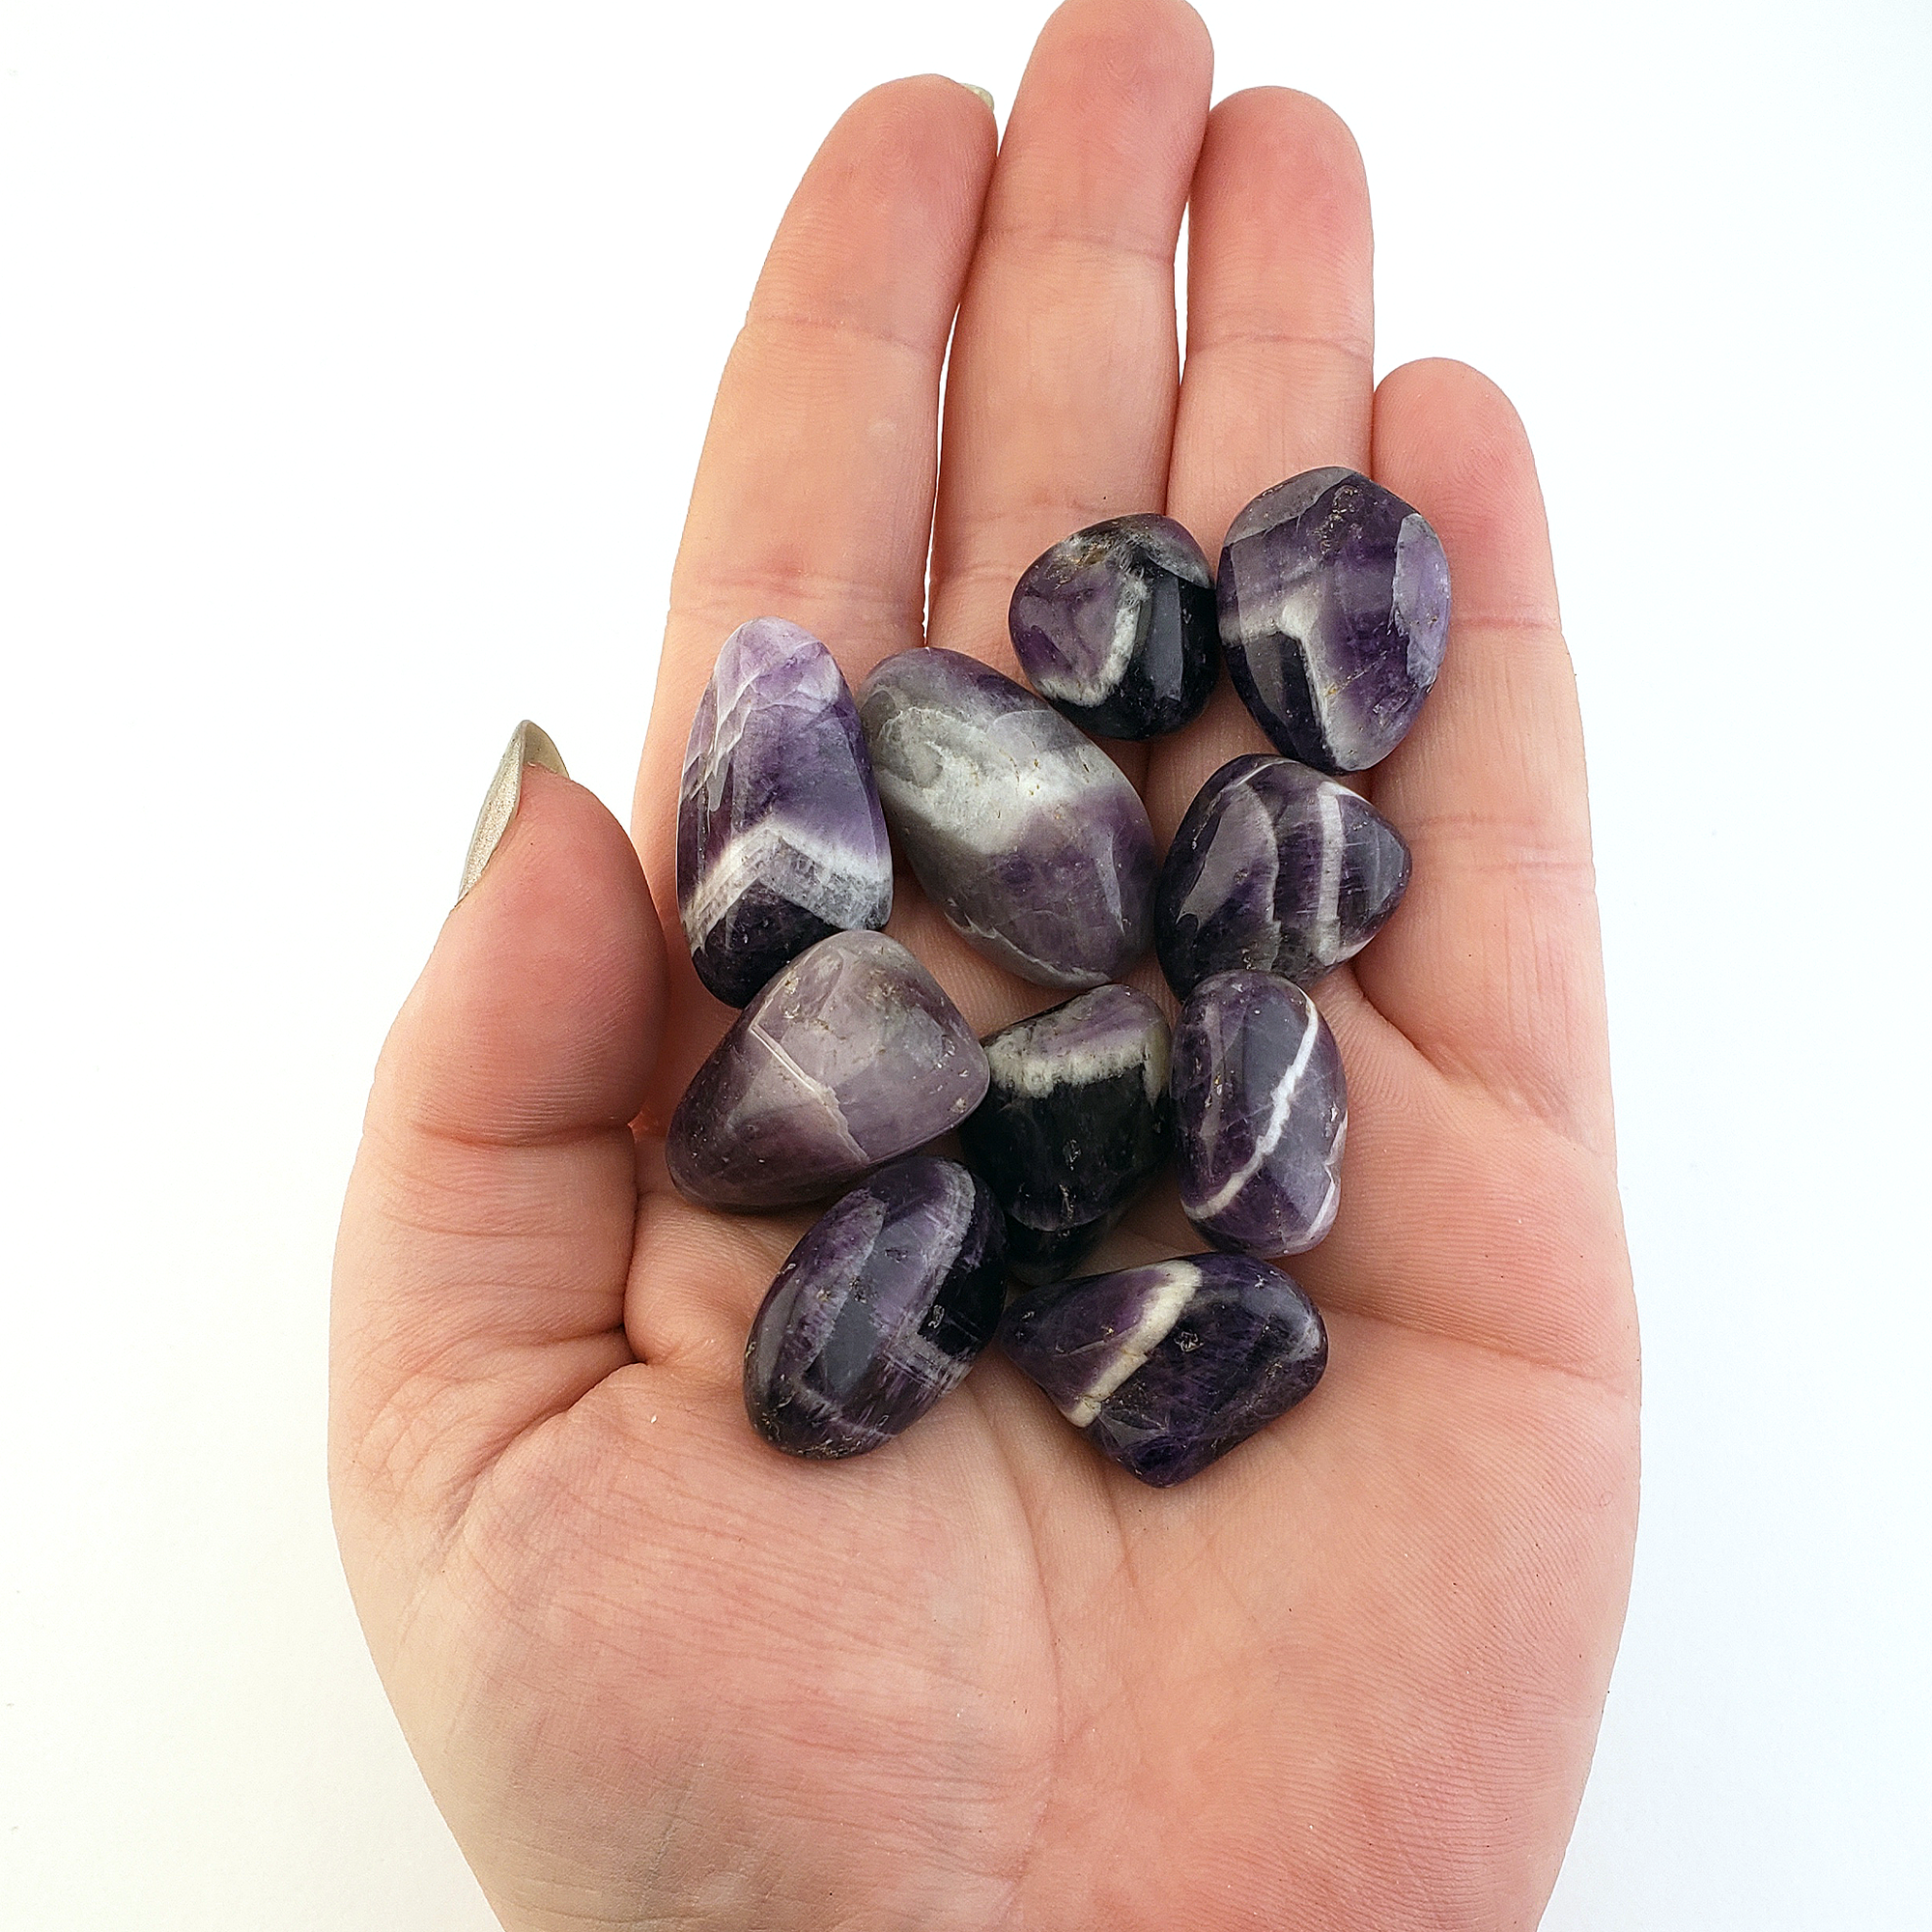 Chevron Amethyst Natural Tumbled Crystal - Small One Stone - In Palm of Hand